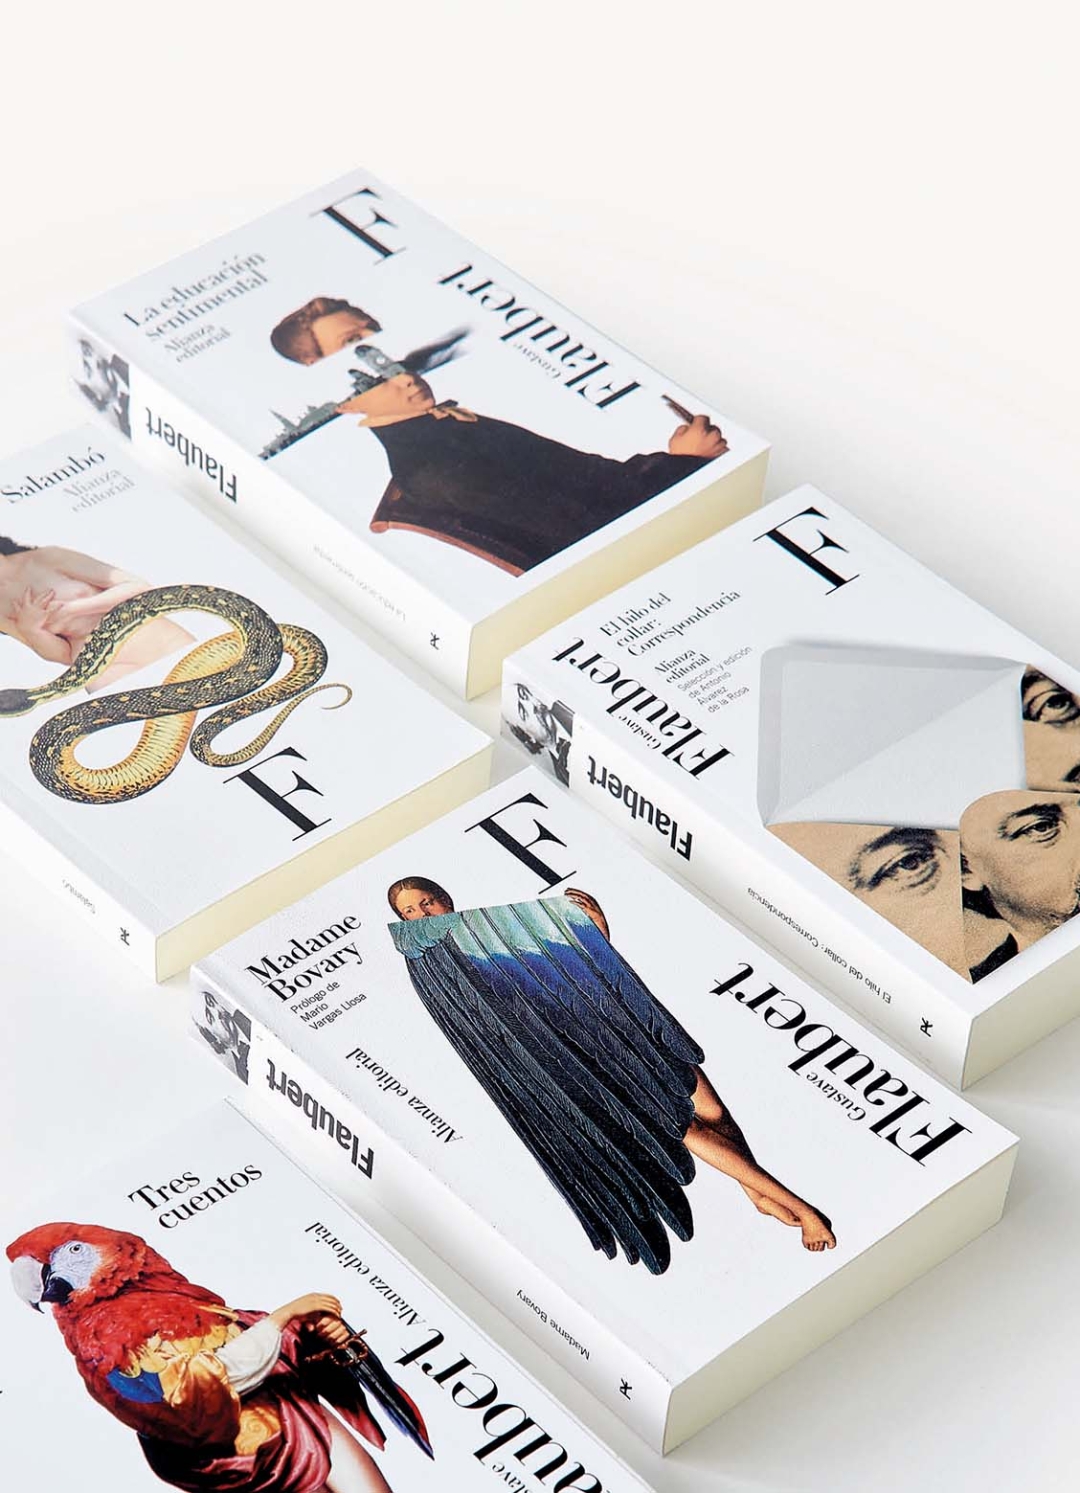 The covers of Gustave Flaubert’s works designed by Manuel Estrada for Alianza Editorial